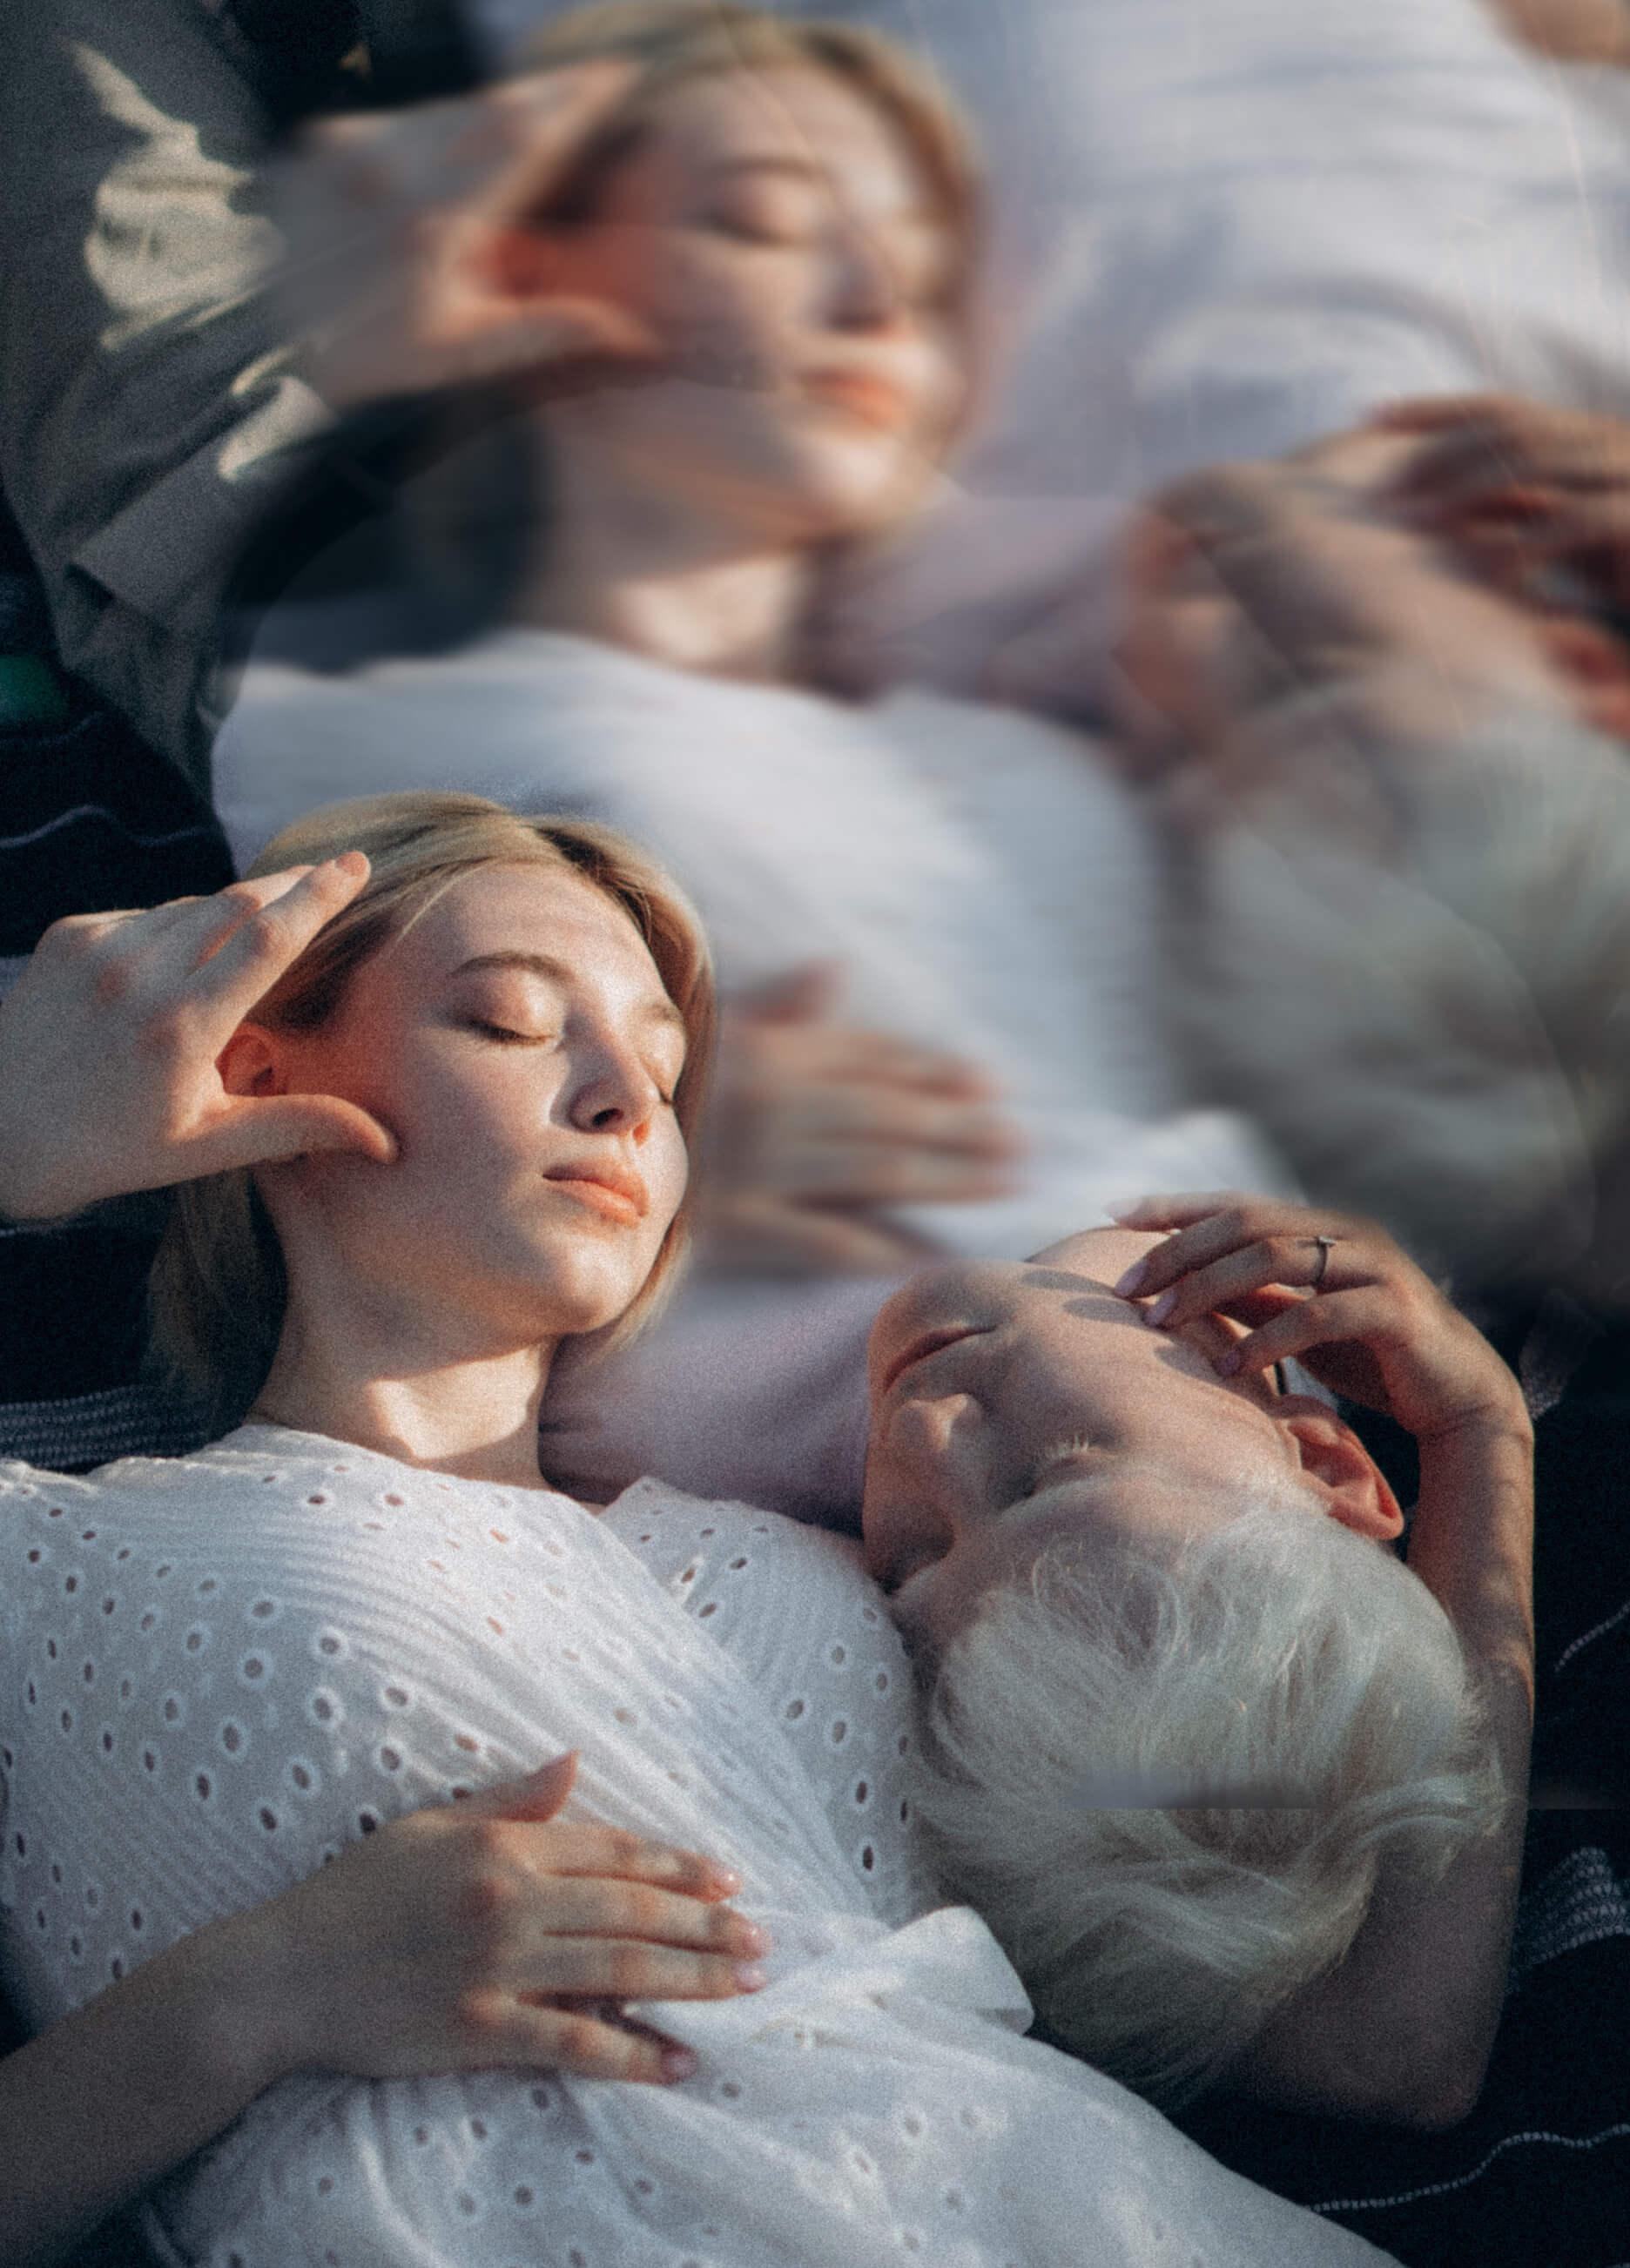 A man and woman lying on there backs with their eye's closed in an ethereal light struggling to communicate.